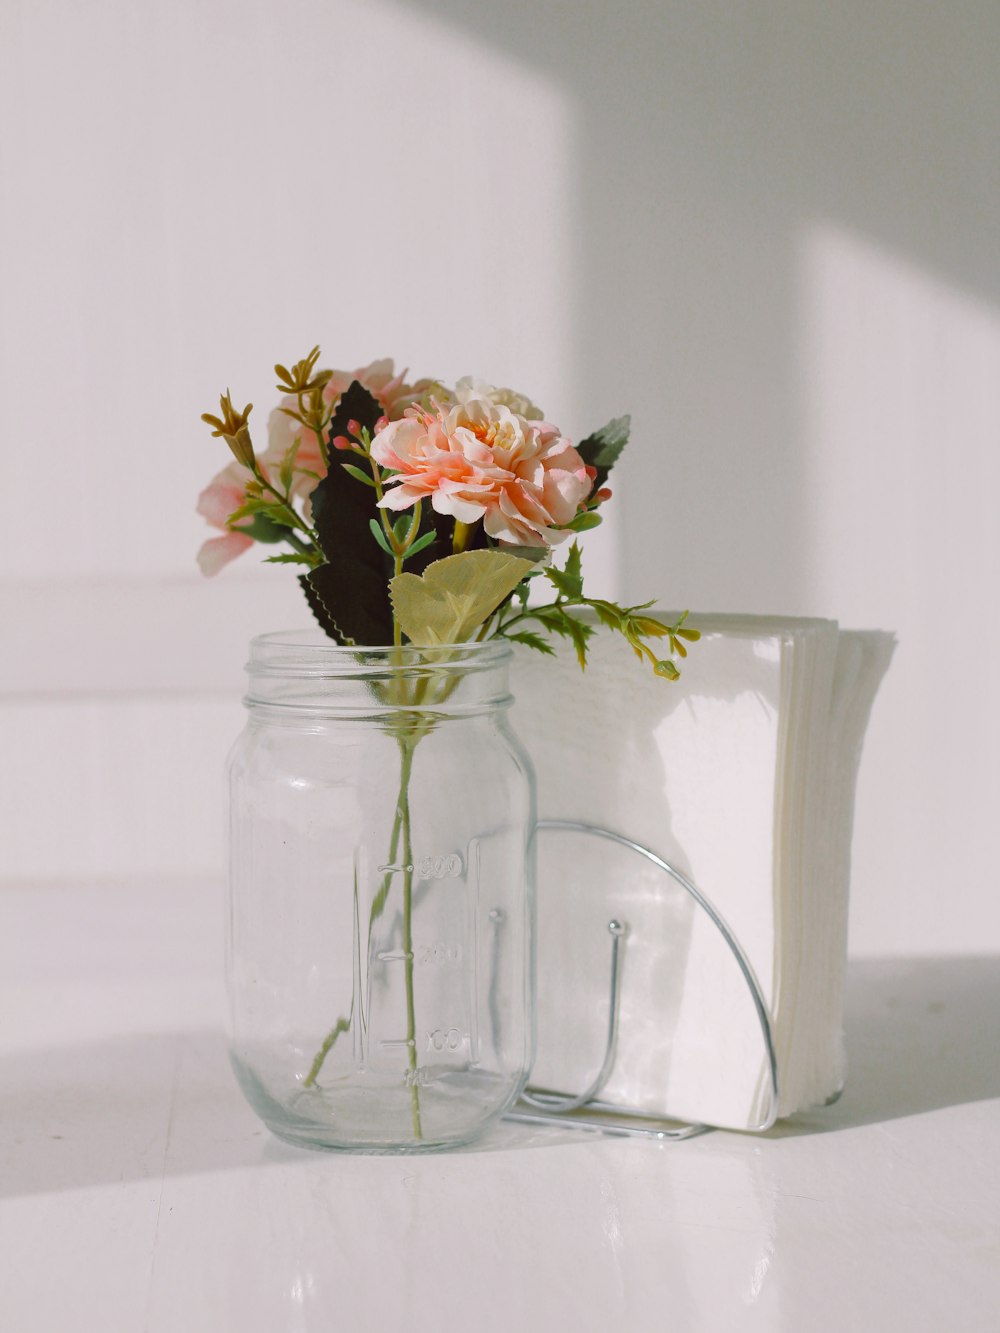 a glass jar with flowers in it sitting on a table